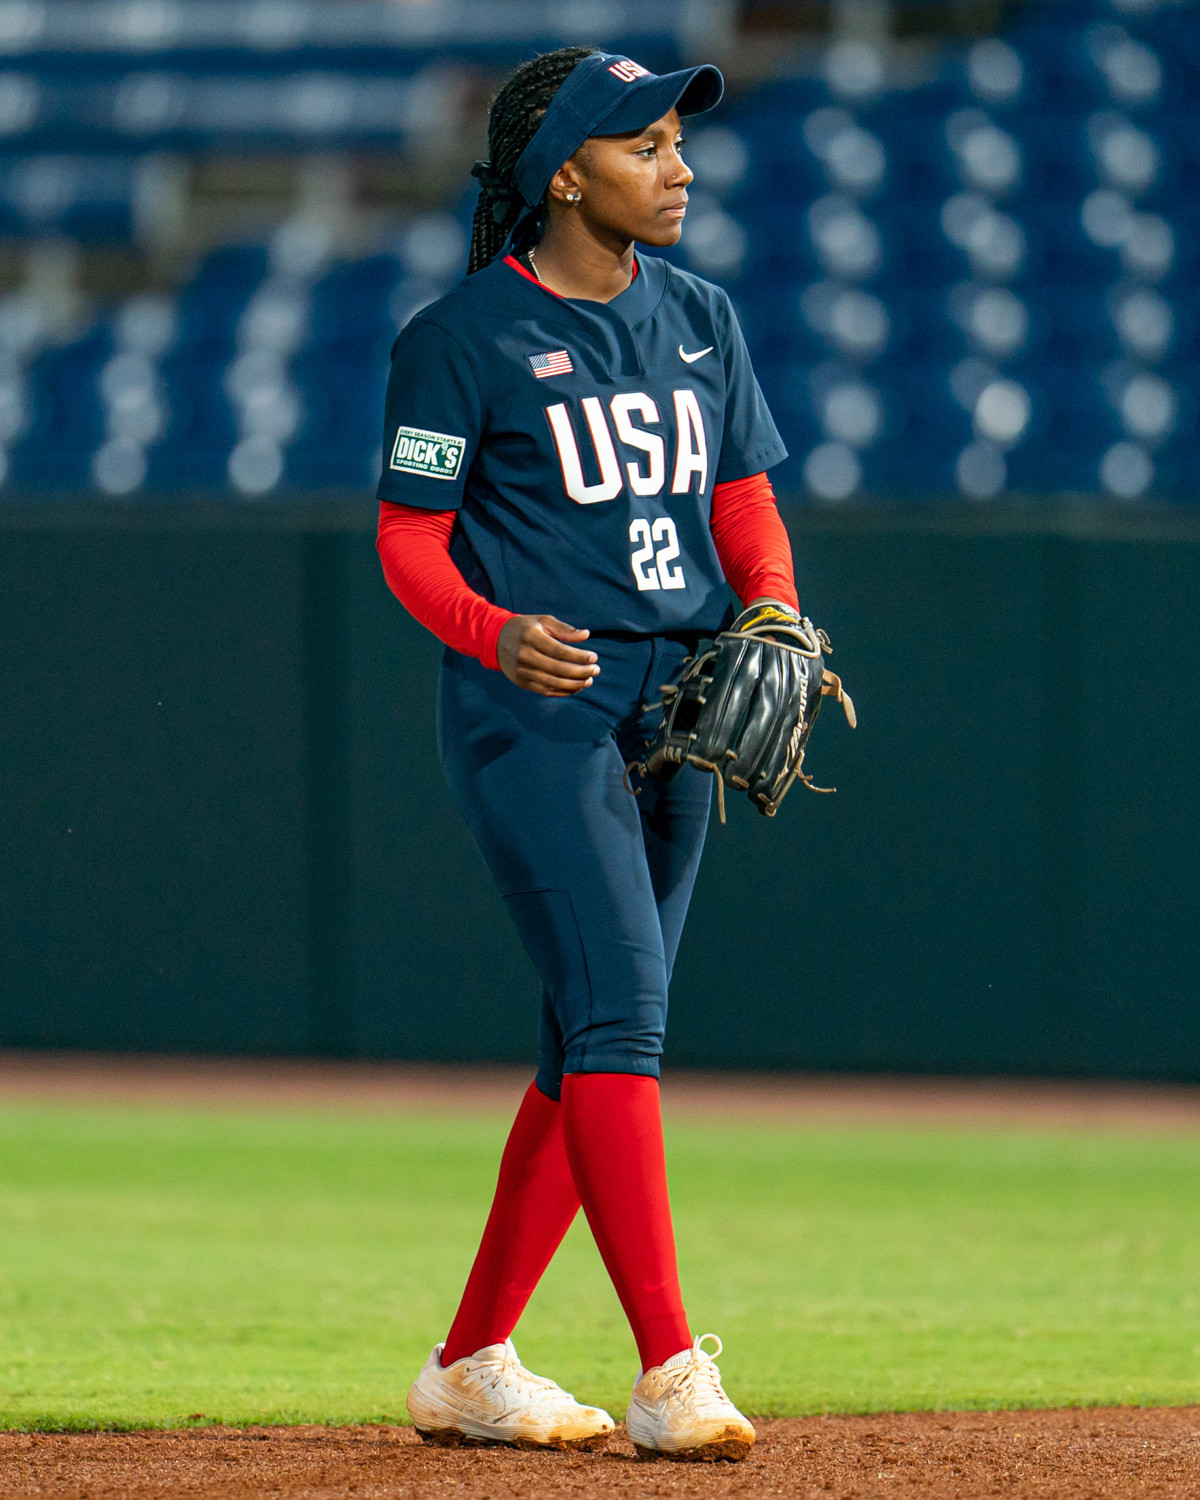 Janae Jefferson hit a bases-clearing double to help the US win the women's softball final 3-2 against Japan ©The World Games 2022